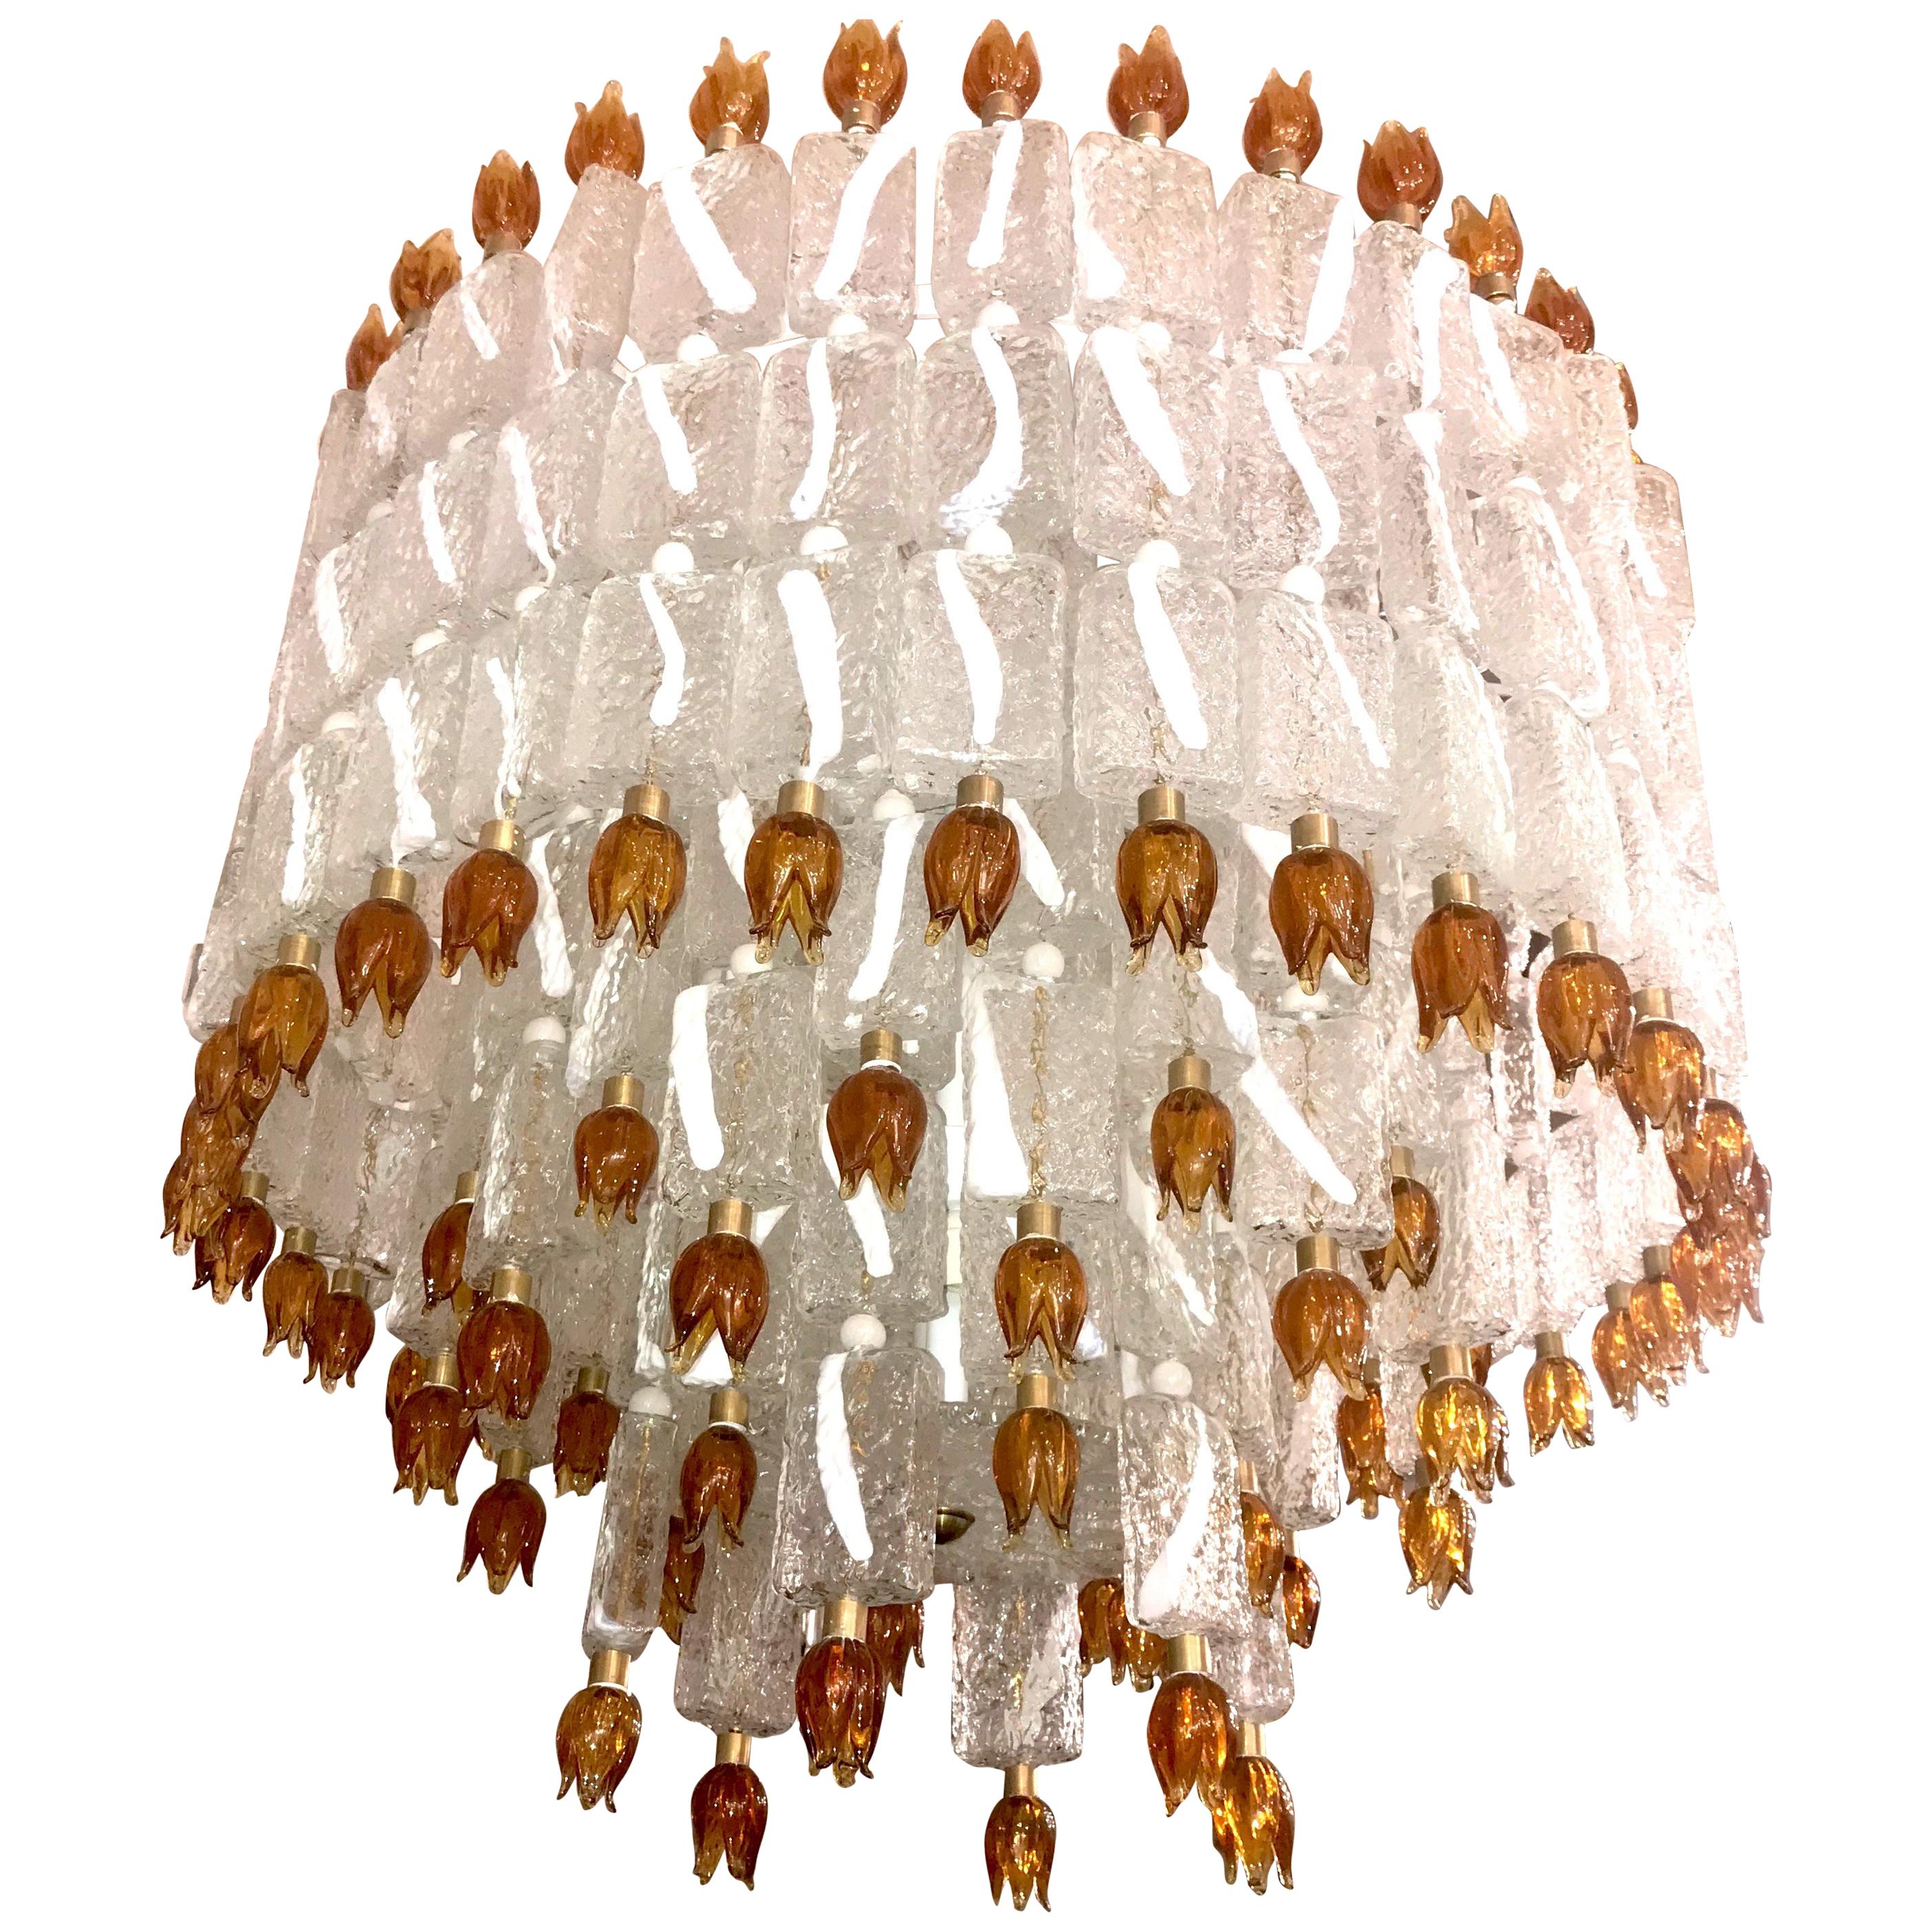 Barovier & Toso Murano Glass Blocks with Gold Rosettes Chandelier, 1940